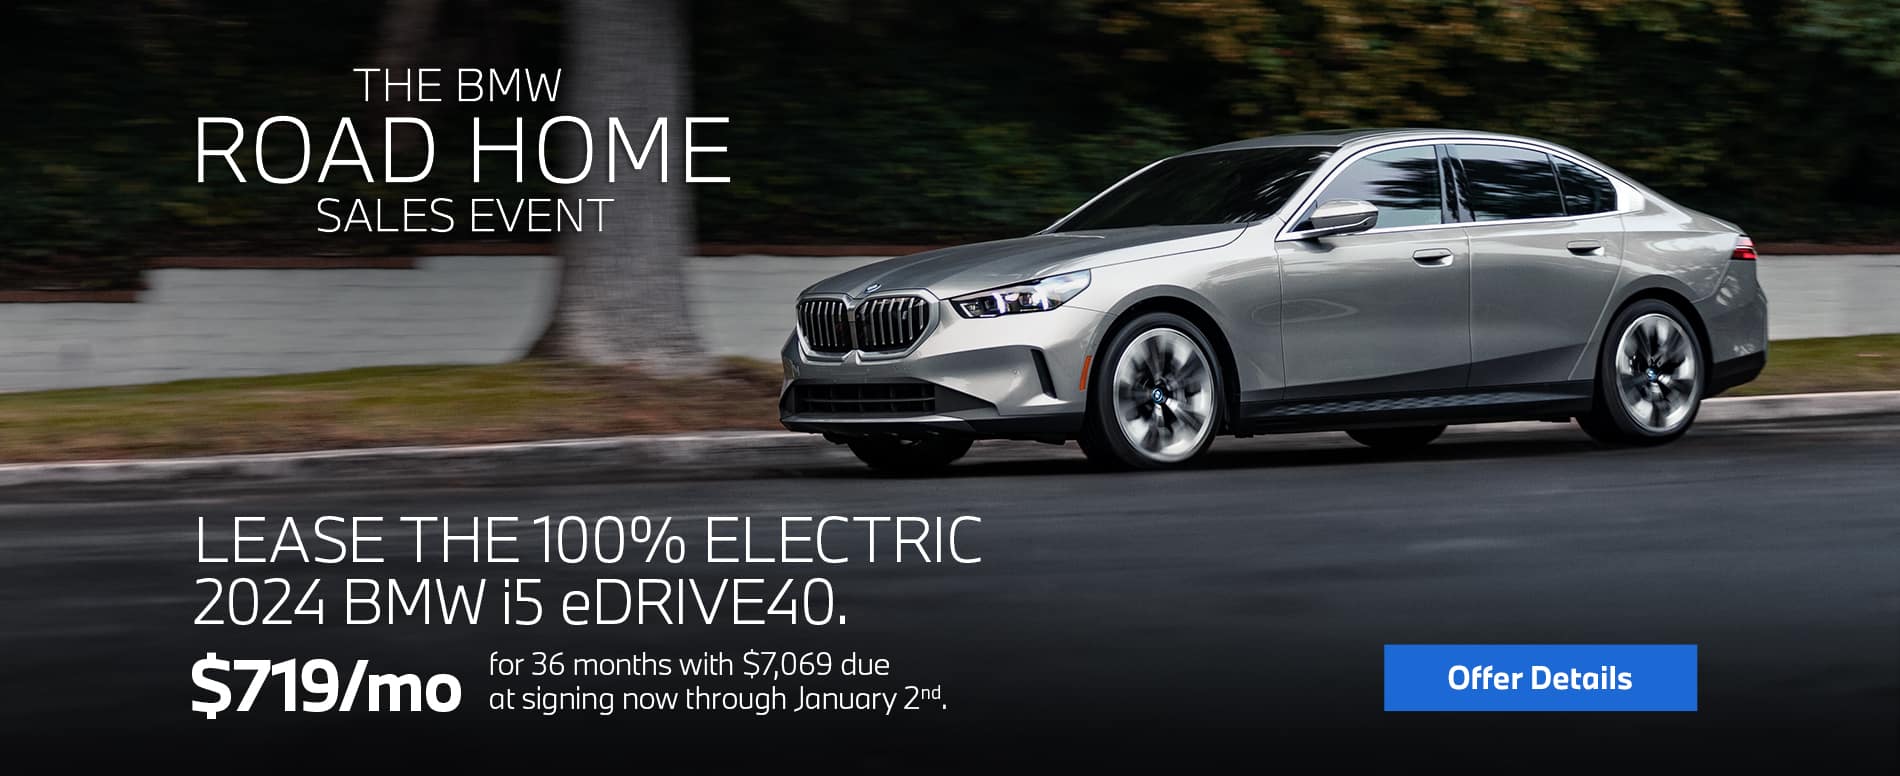 2024 i5 eDrive40 lease starting at $719 per month for 36 months